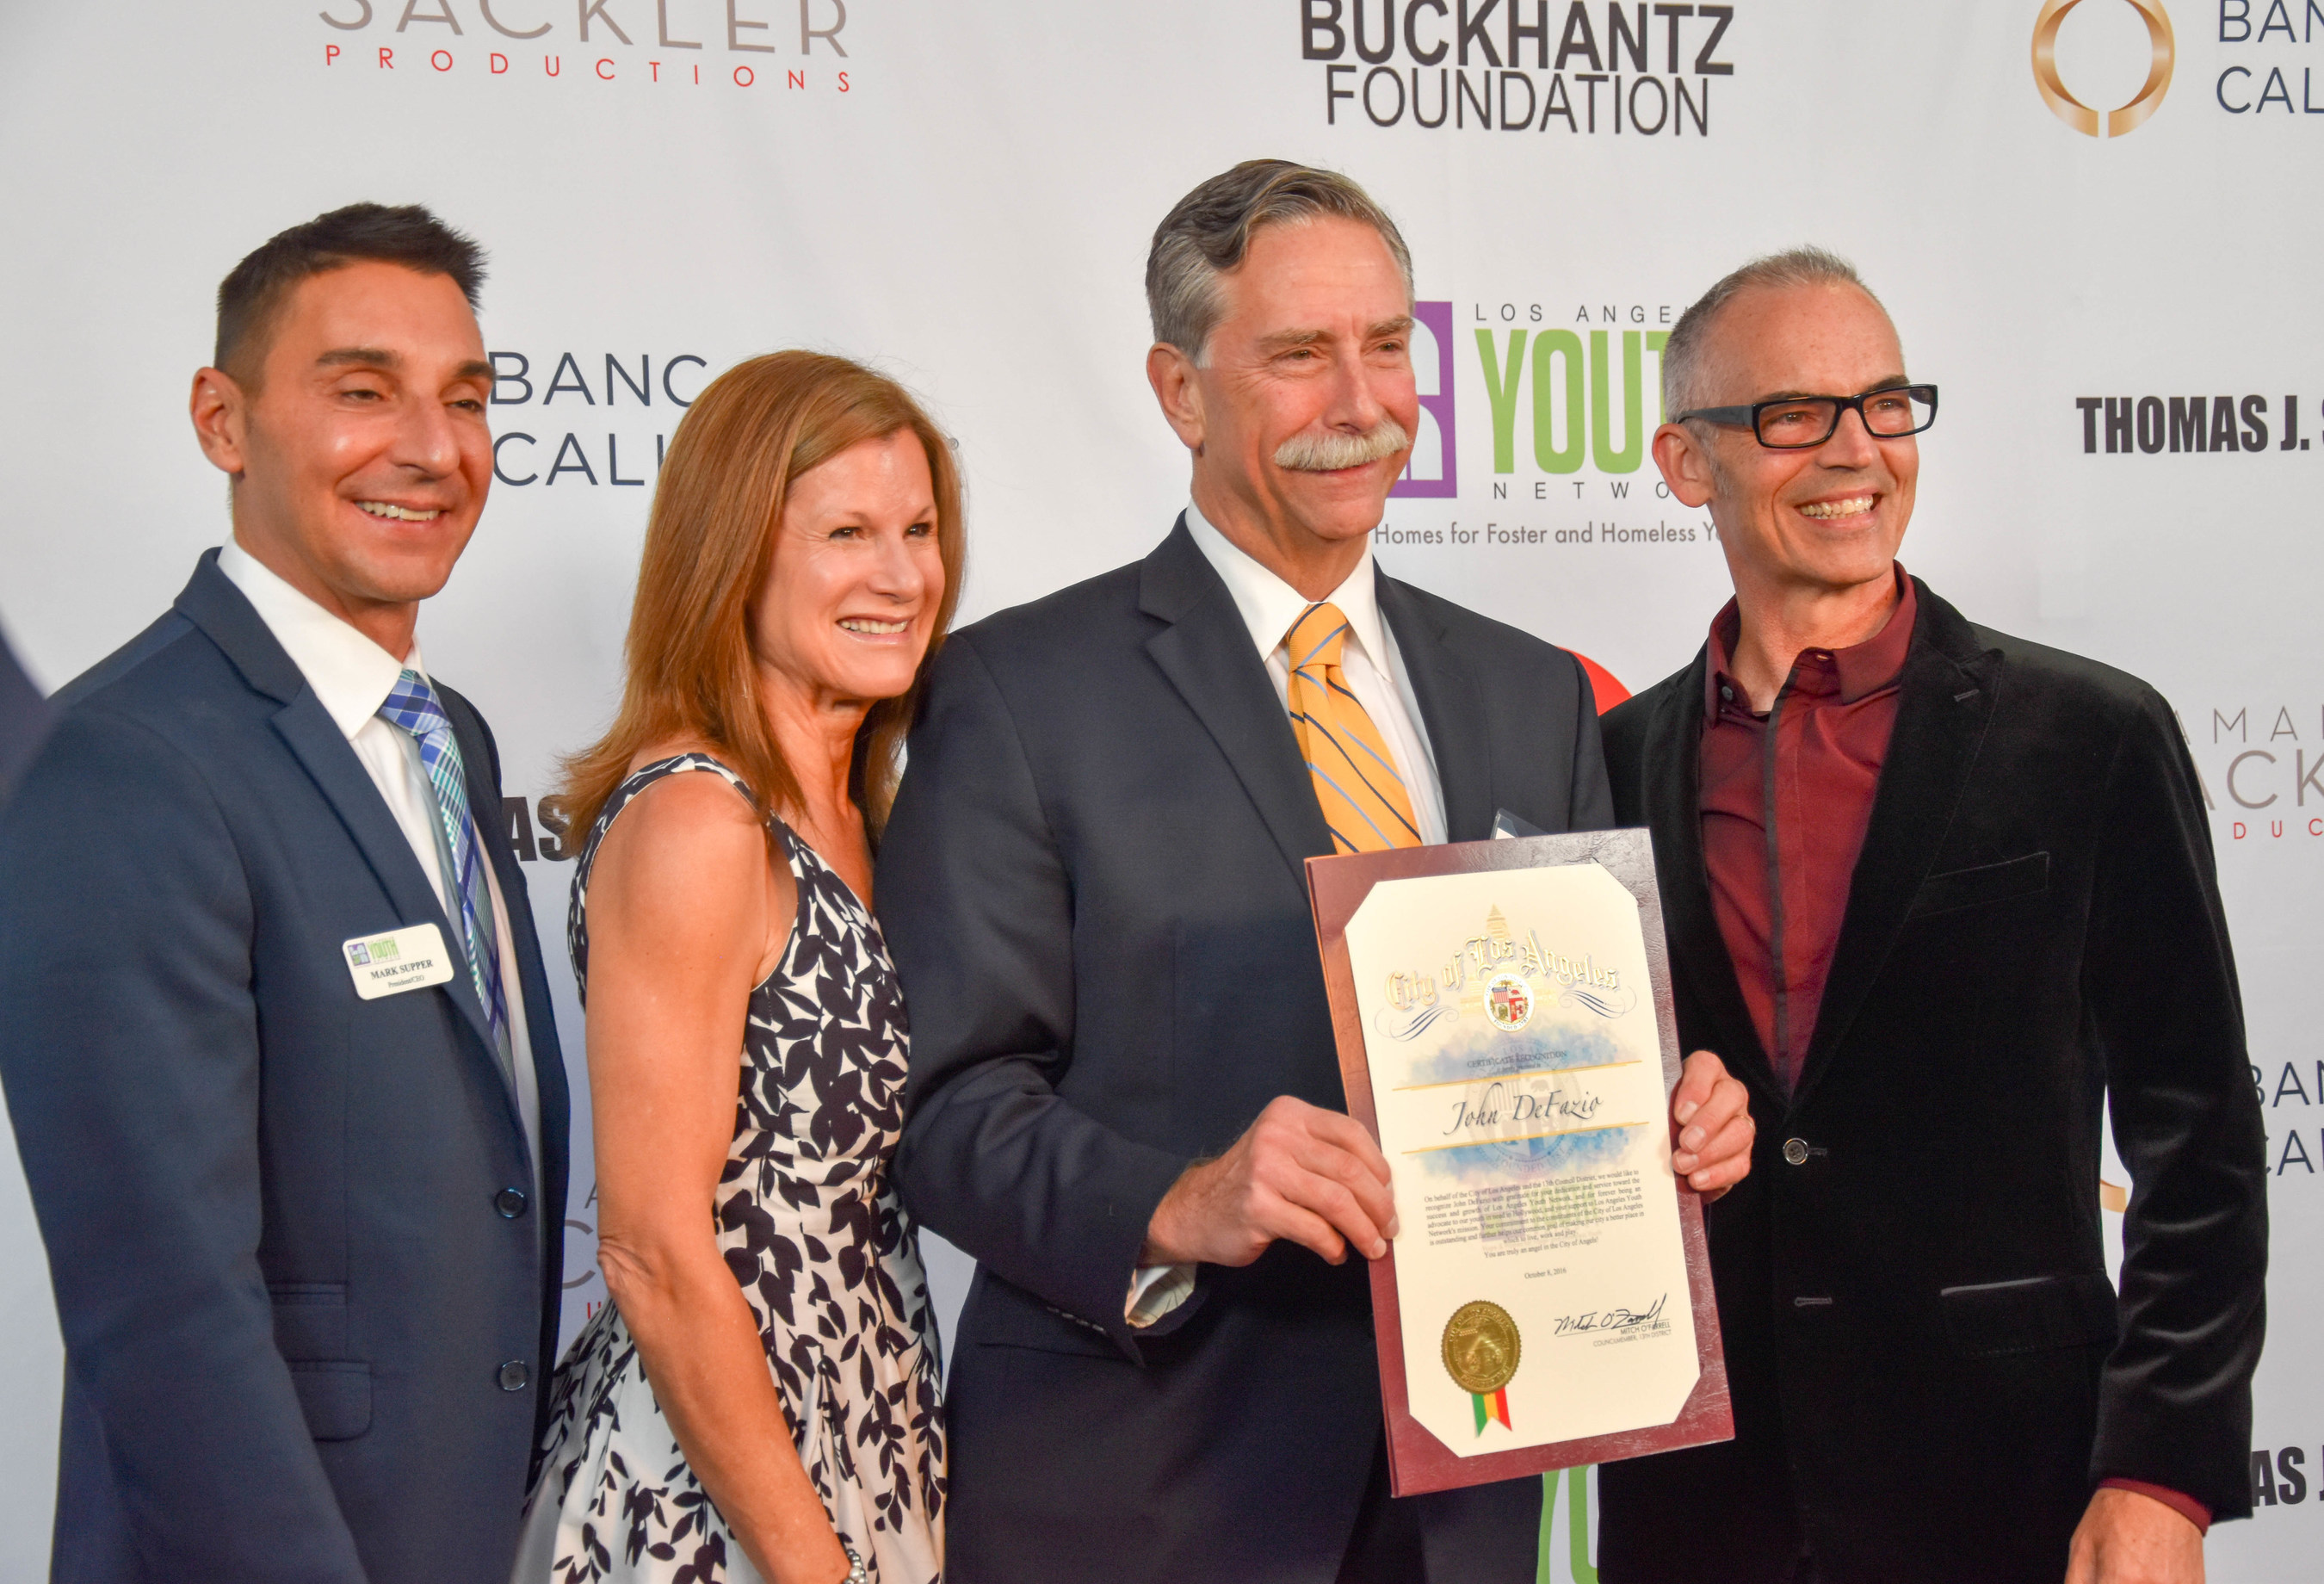 Los Angeles Youth Network CEO, Mark Supper and Councilman Mitch O'Farrell, present Key of Hope Award recipient, John DeFazio, of Heffernan Insurance Brokers and his wife, Donna DeFazio with a proclamation, during the 2016 Key of Hope Gala - Unlocking the Possibilities for Our Homeless and Foster Youth.